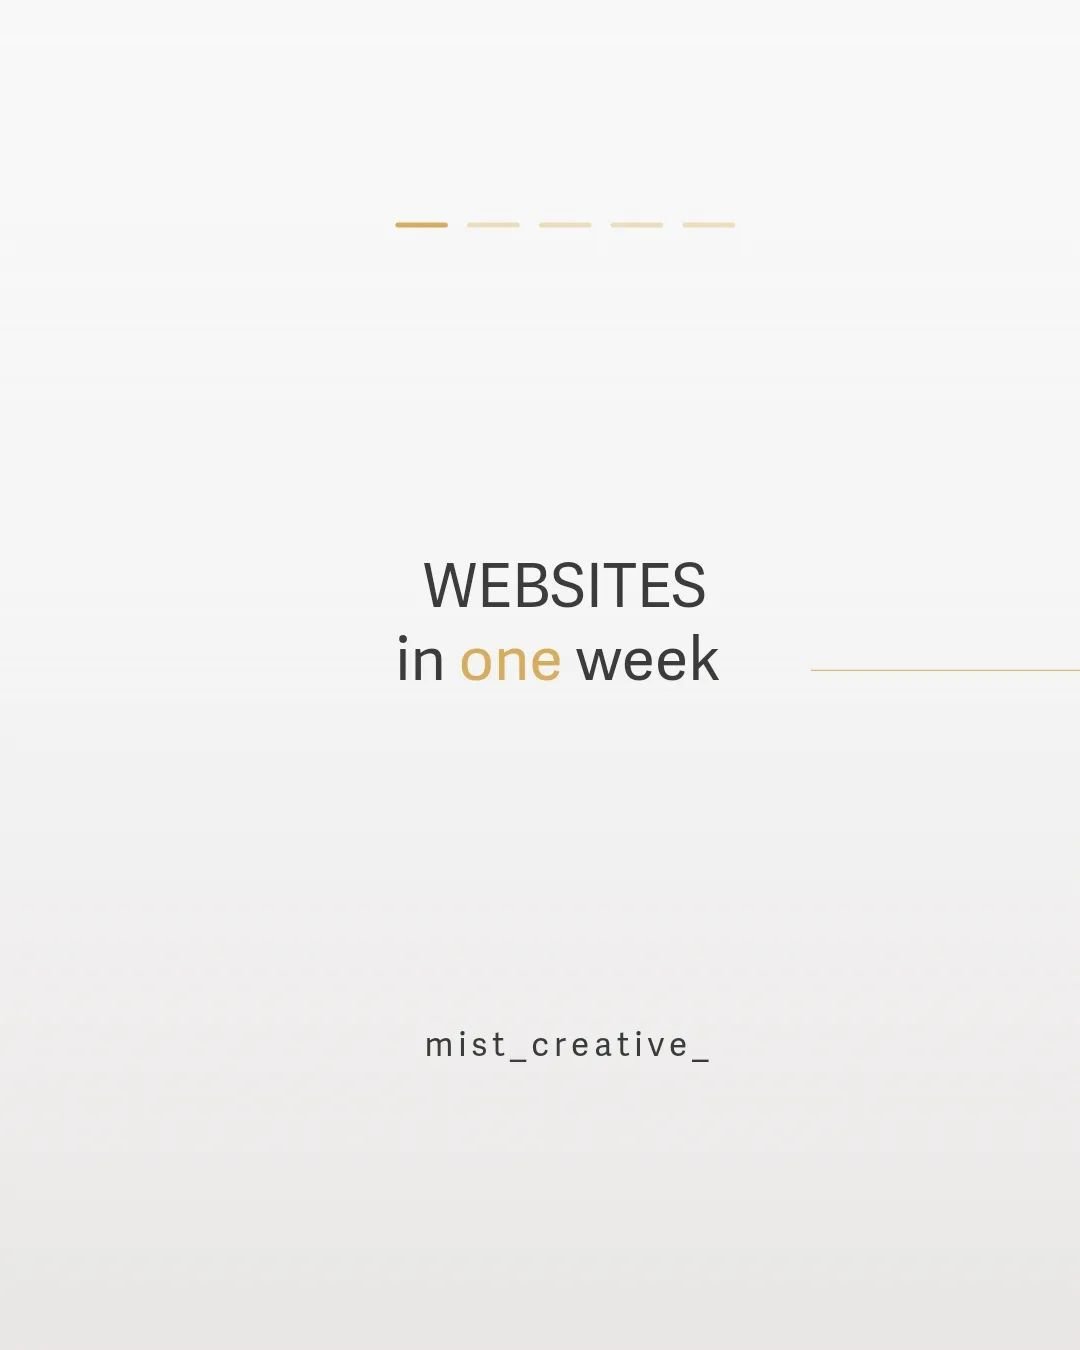 Yep you heard it right, website in  ONE WEEK!💻

Get the same top-quality custom website you'd expect in a quarter of the time.

👇 What&rsquo;s included:

- A strategic plan for the site.
- Full custom design (up to 5 pages).
- UX/UI design implemen